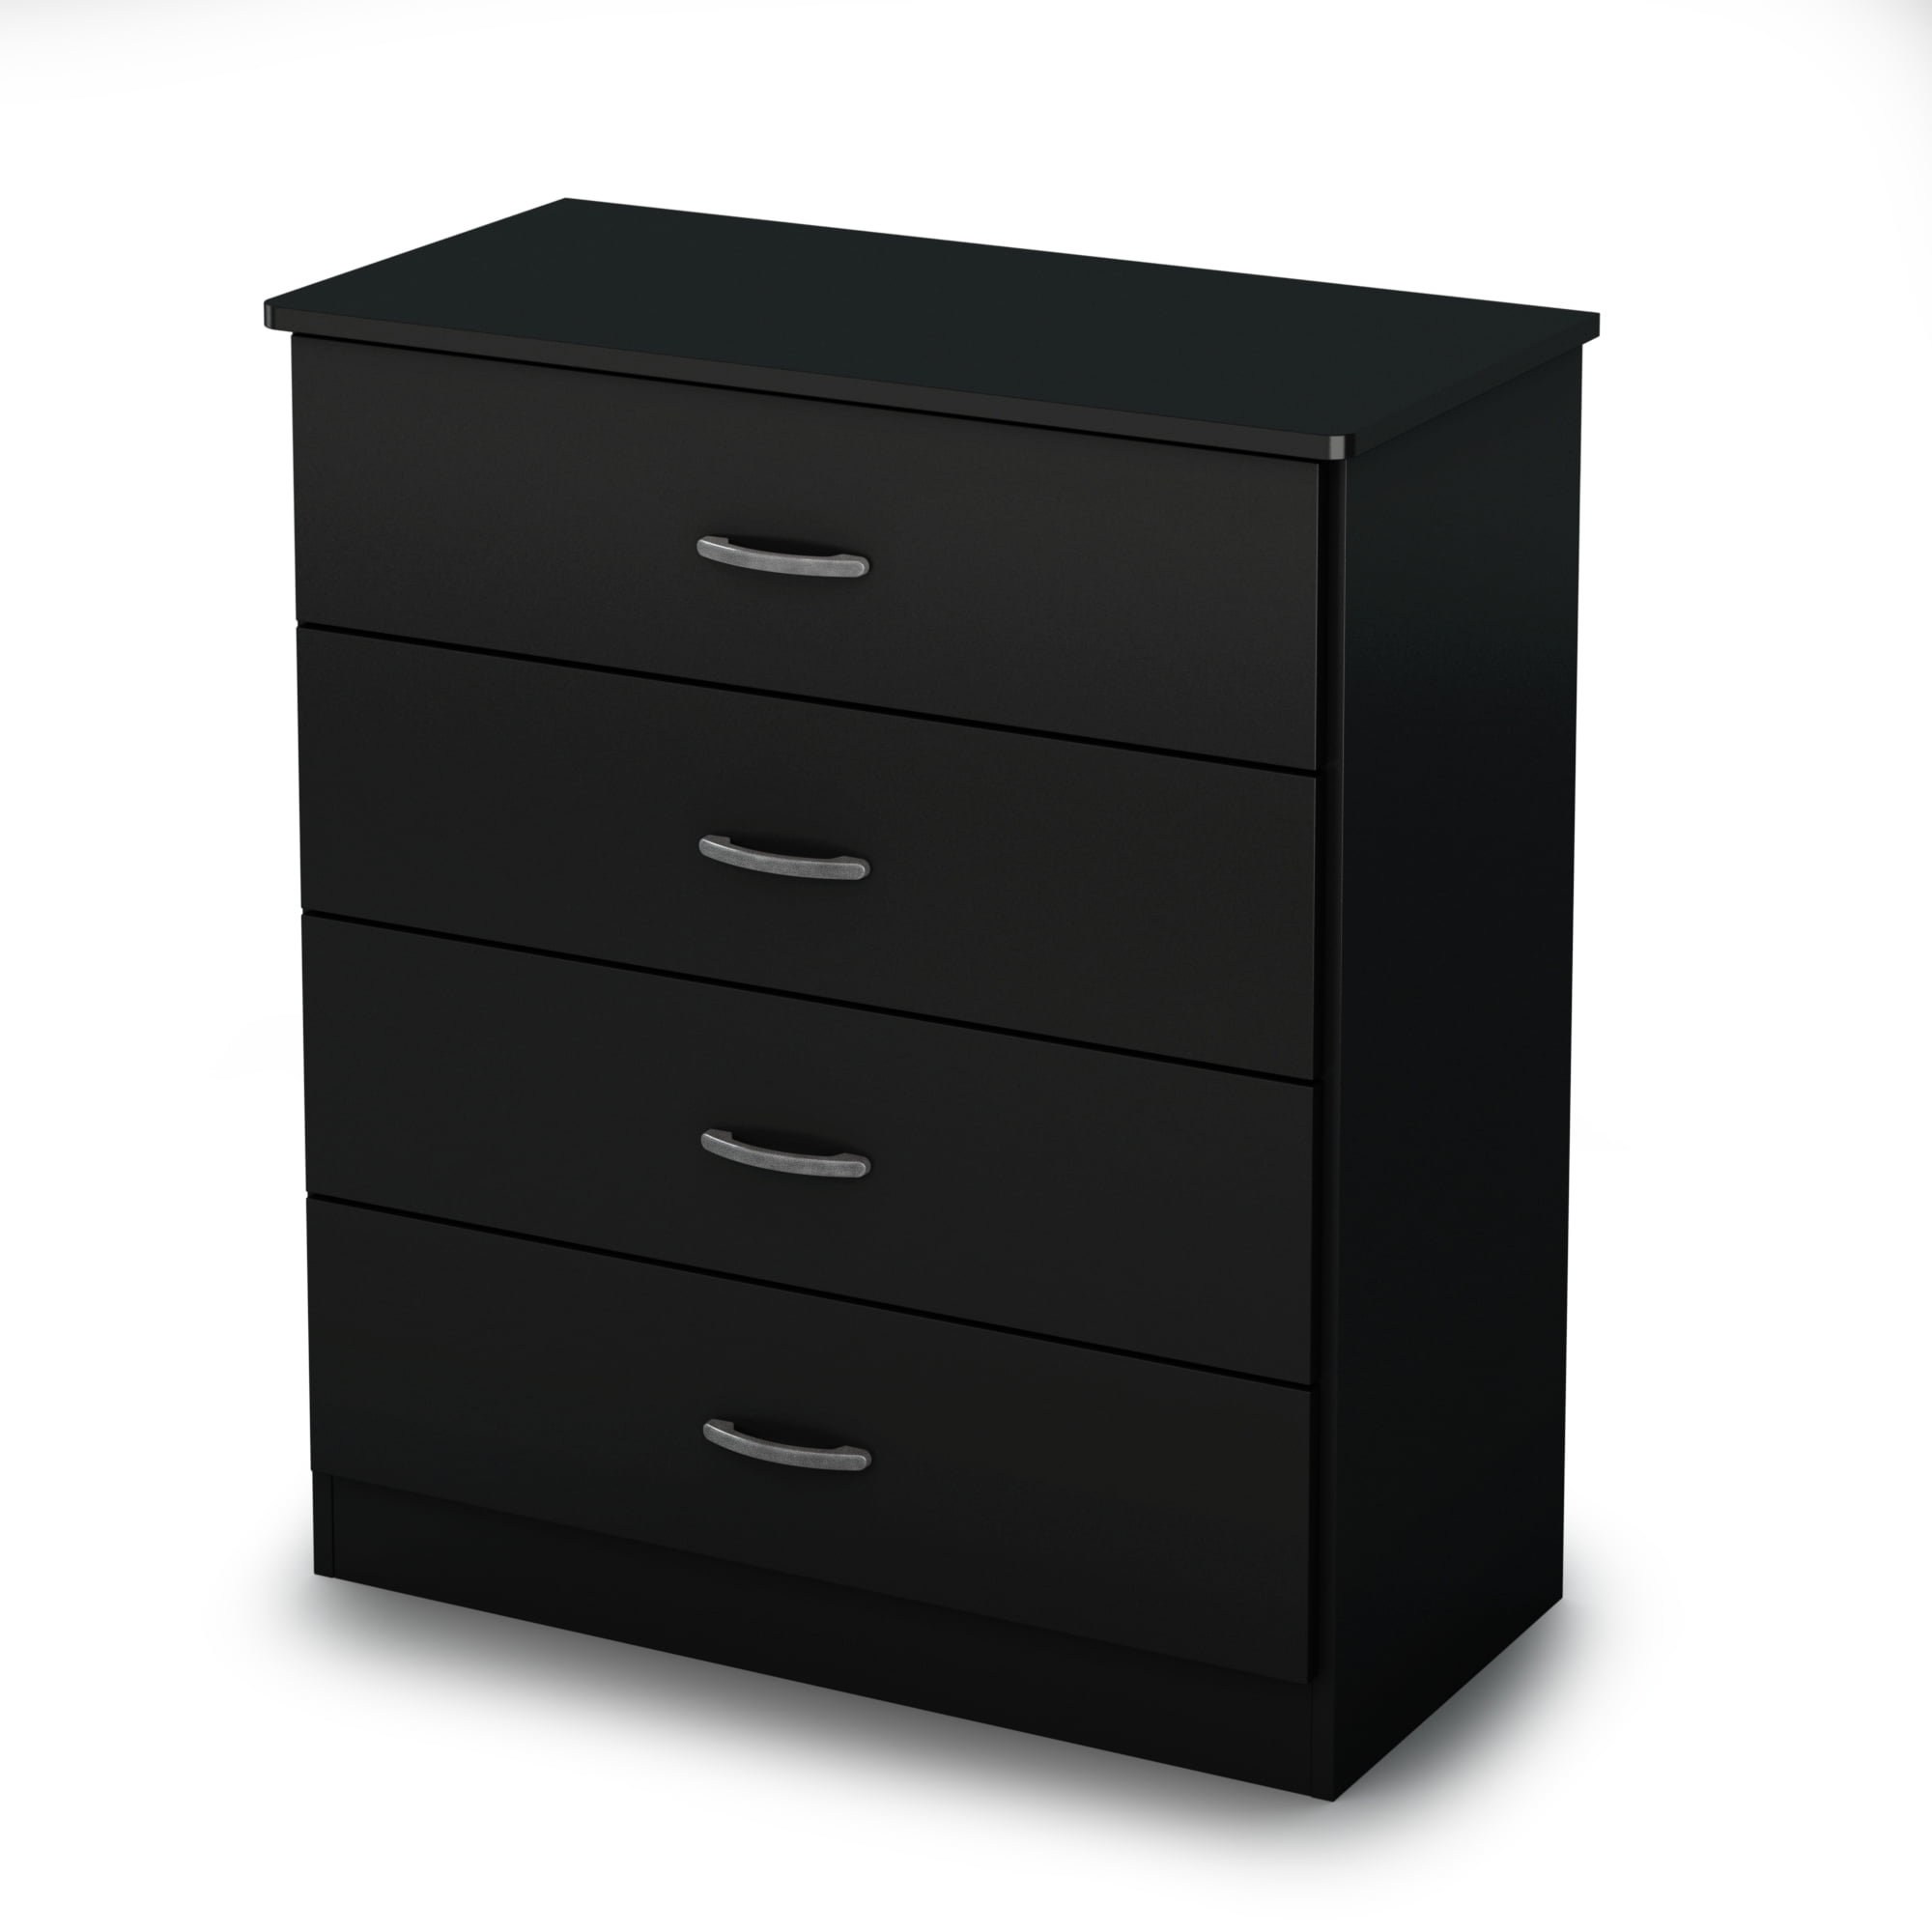 Chocolate with Metal Handles in Pewter Finish South Shore Libra Collection 4-Drawer Dresser